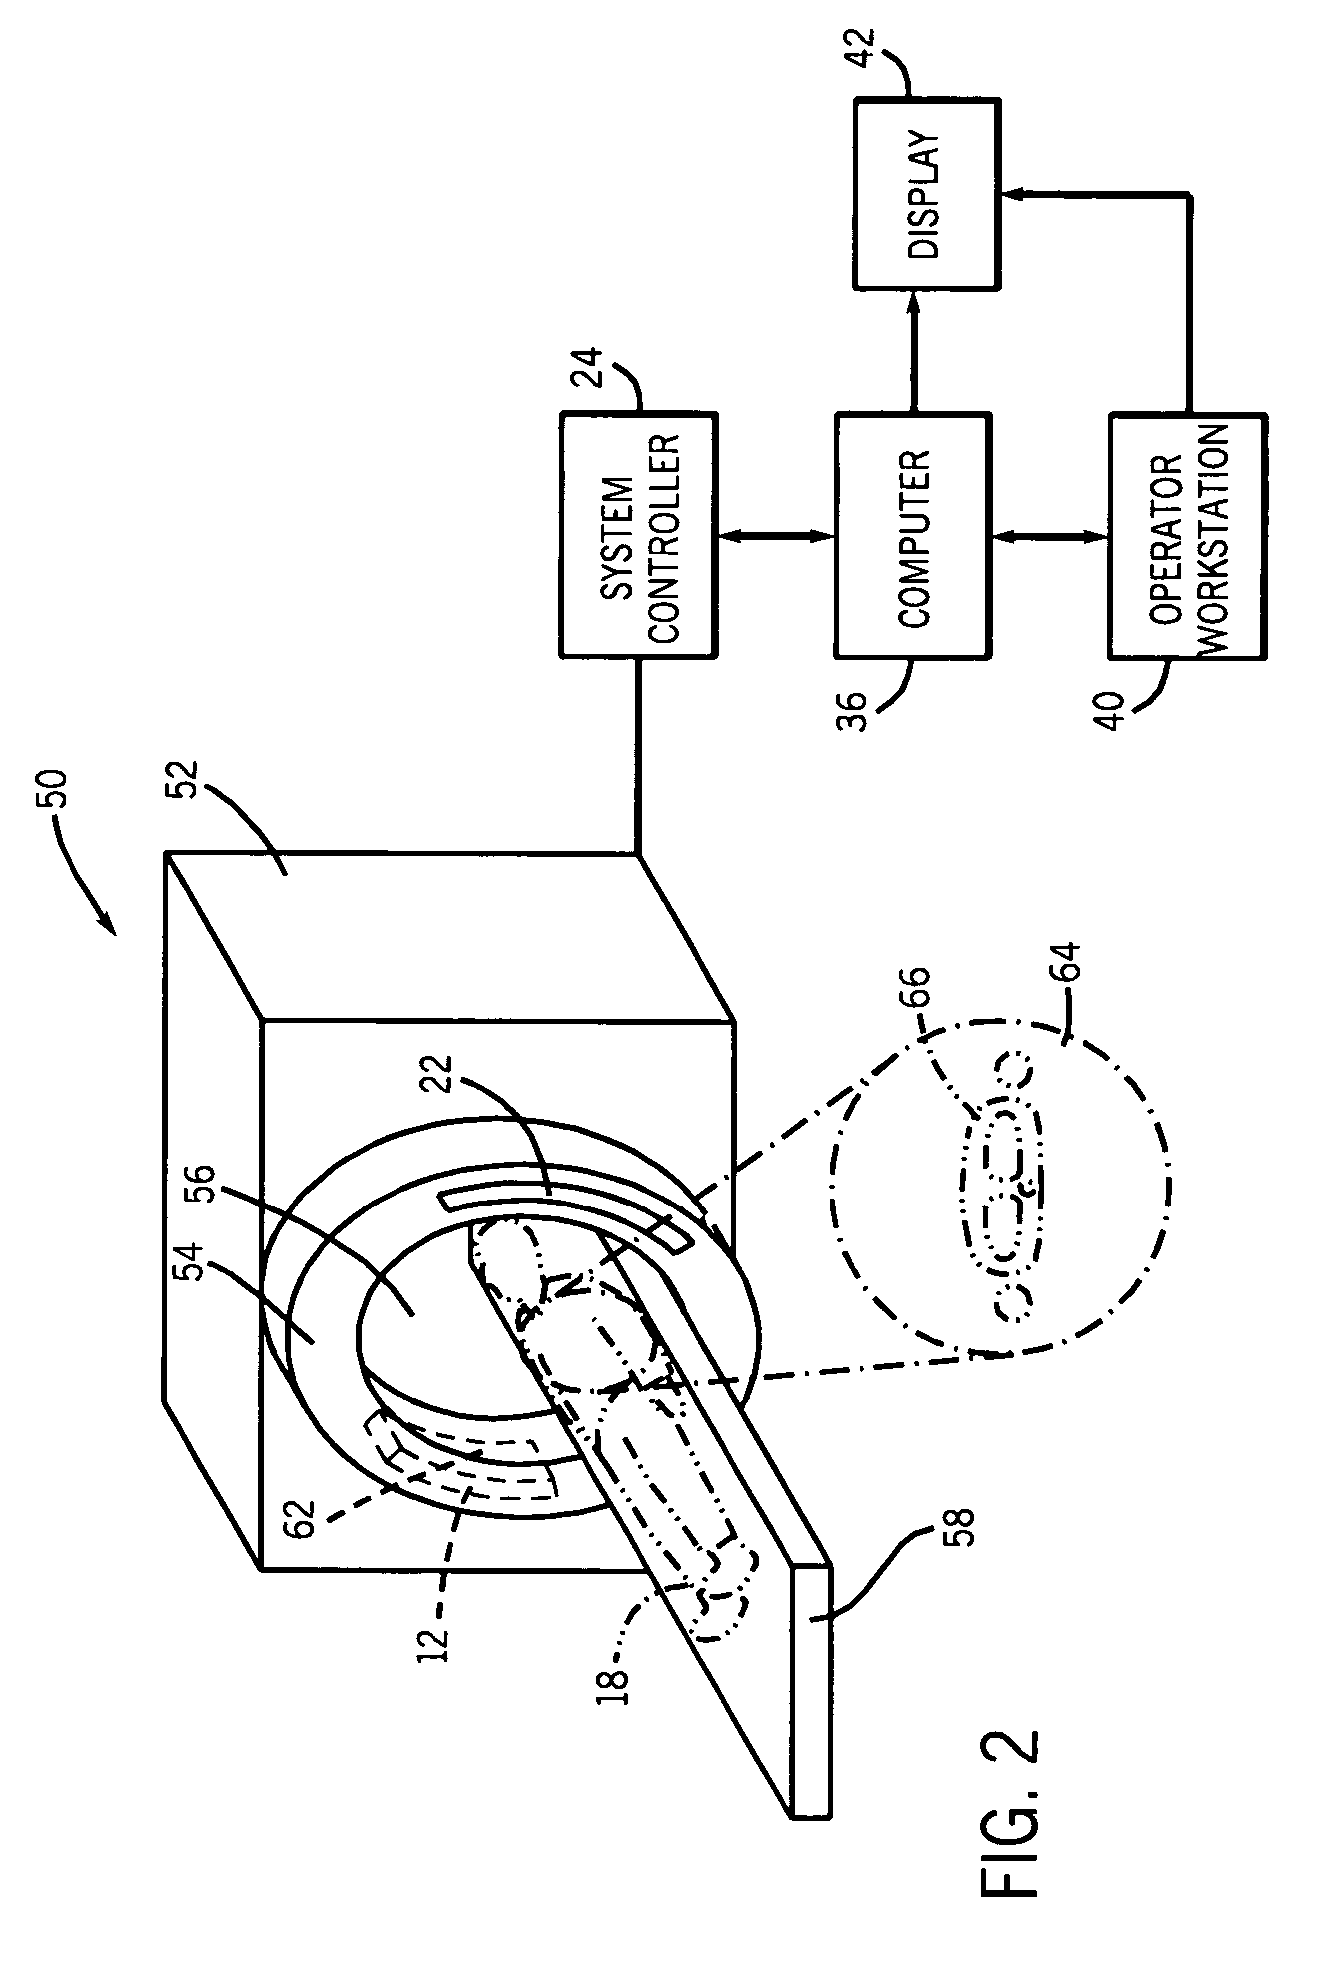 Method and apparatus for segmenting structure in CT angiography